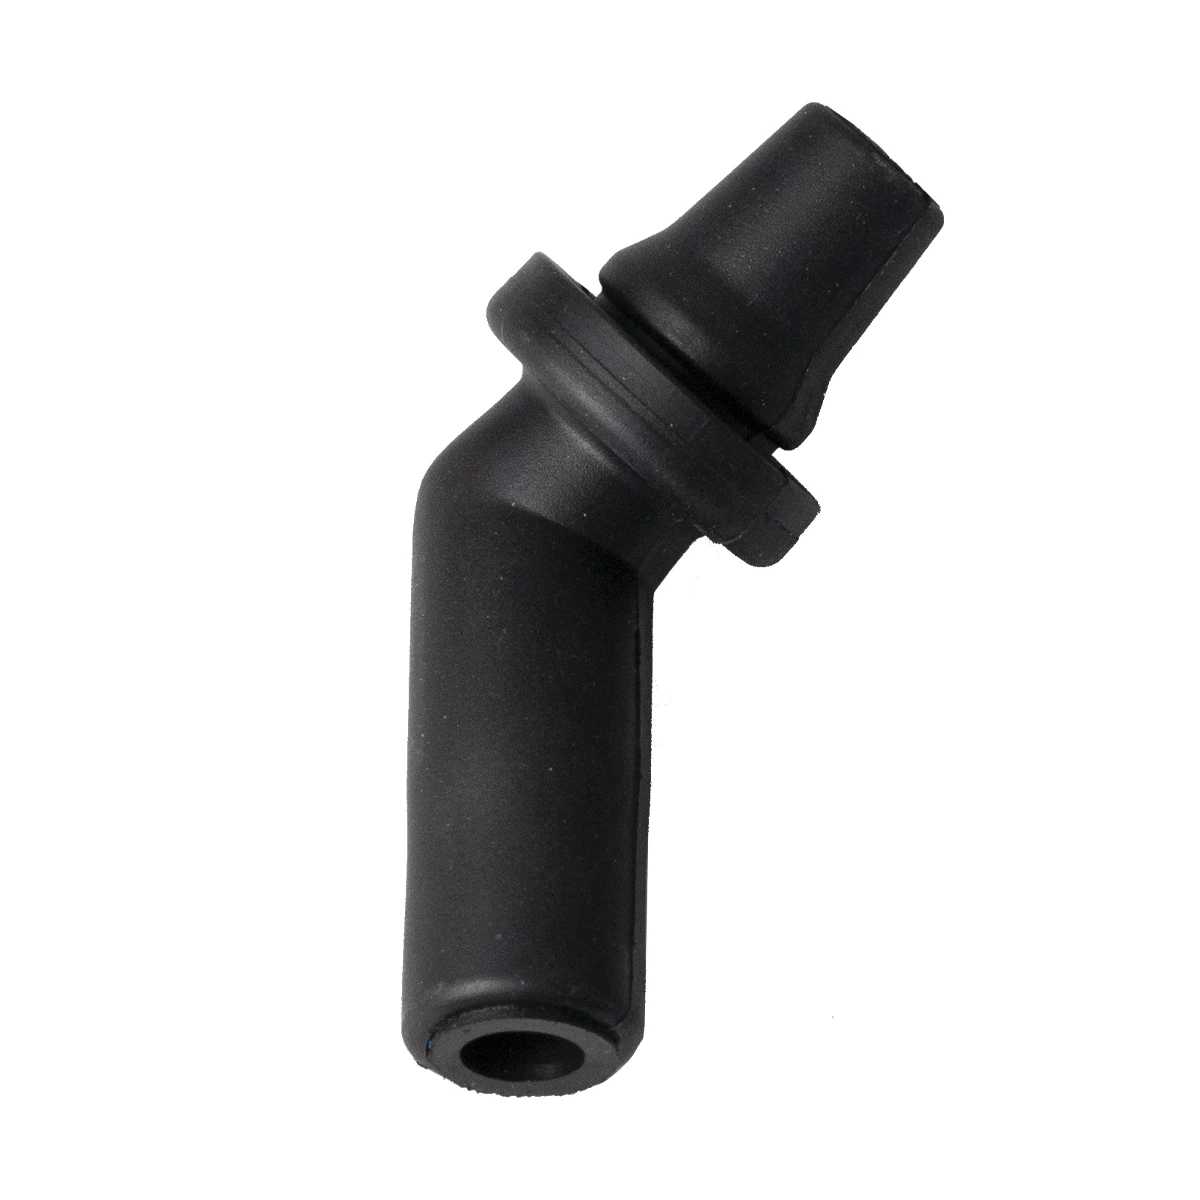 

1PCS Sunroof Drain Tube Front Water Pipe Hose Connector Adapter For Land Rover LR3 LR4 Discovery 3 4 EEH500100